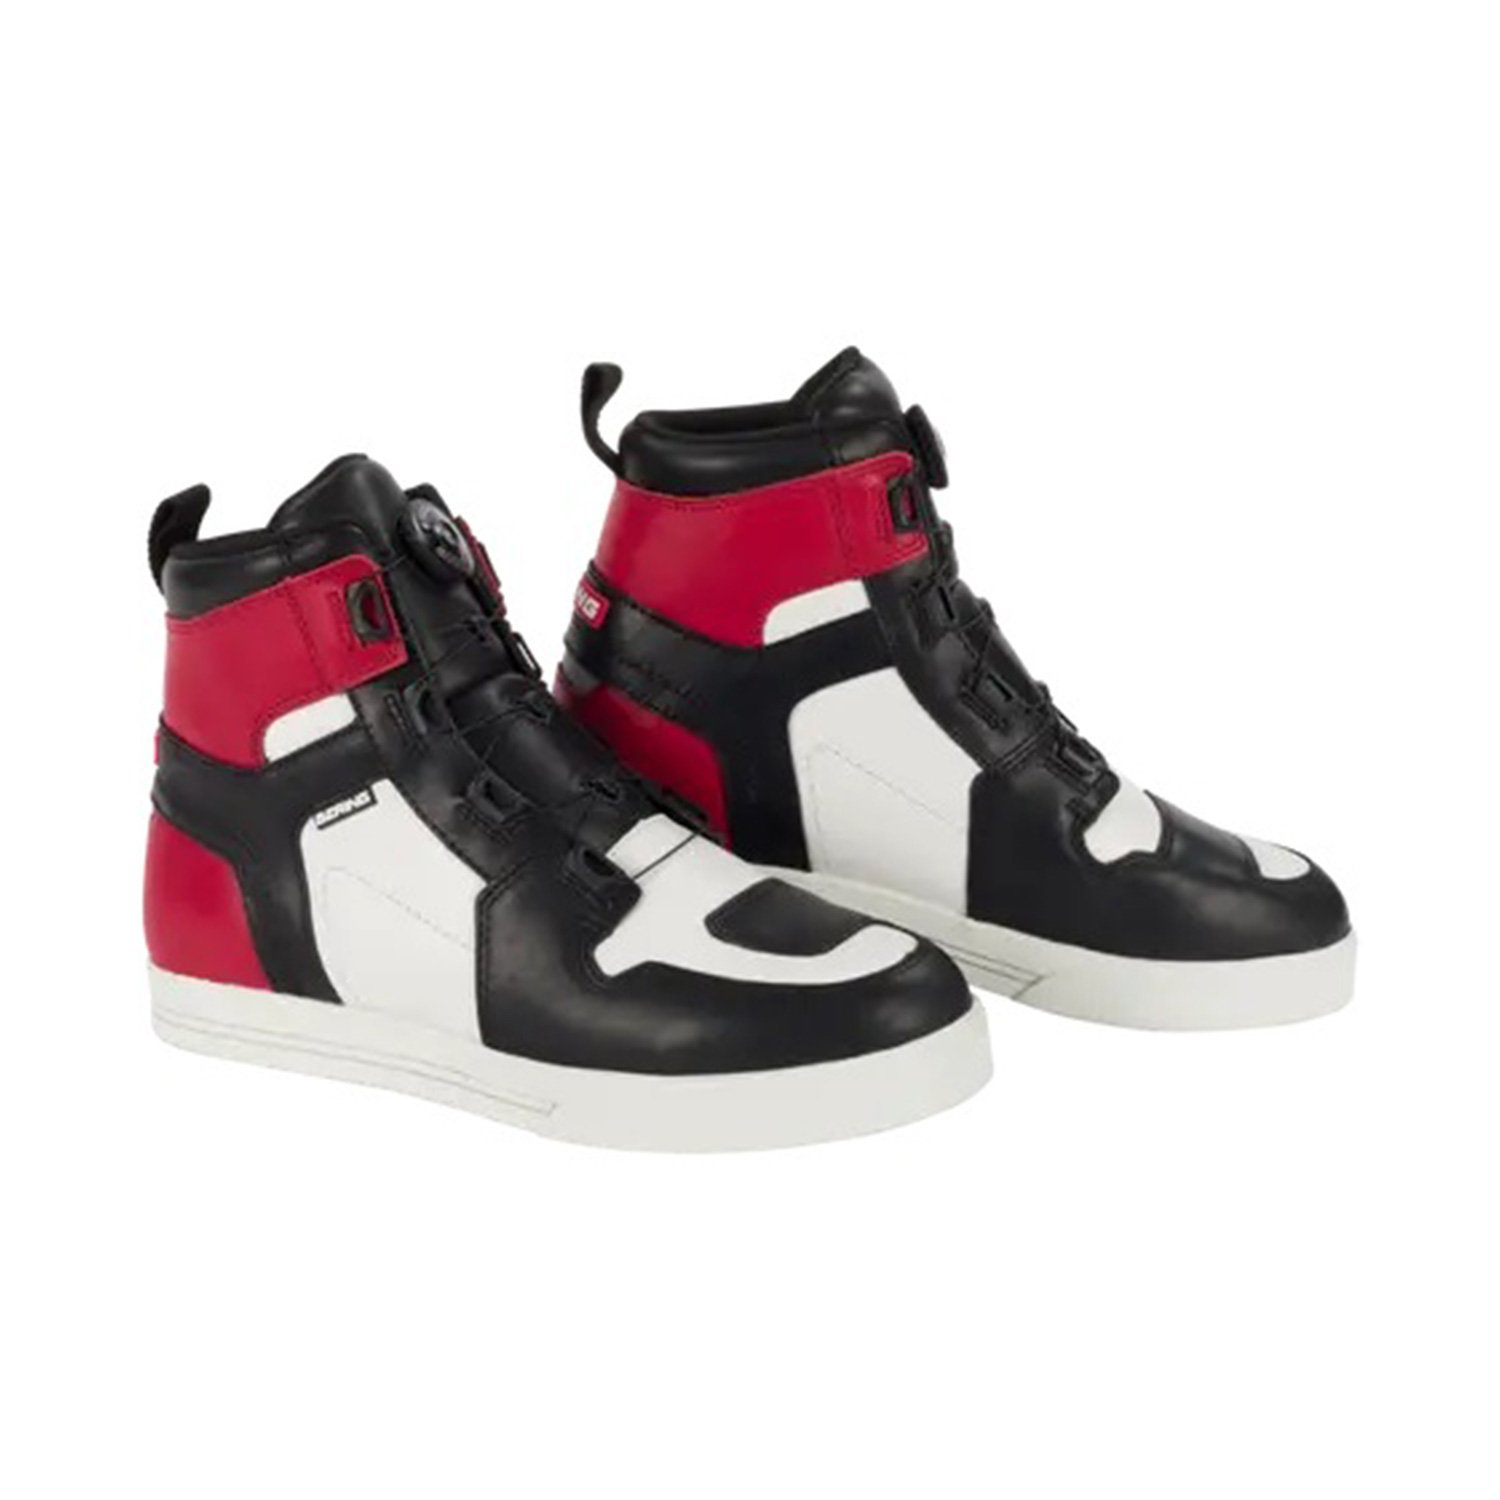 Image of Bering Sneakers Reflex A-Top Black White Red Size 45 EN